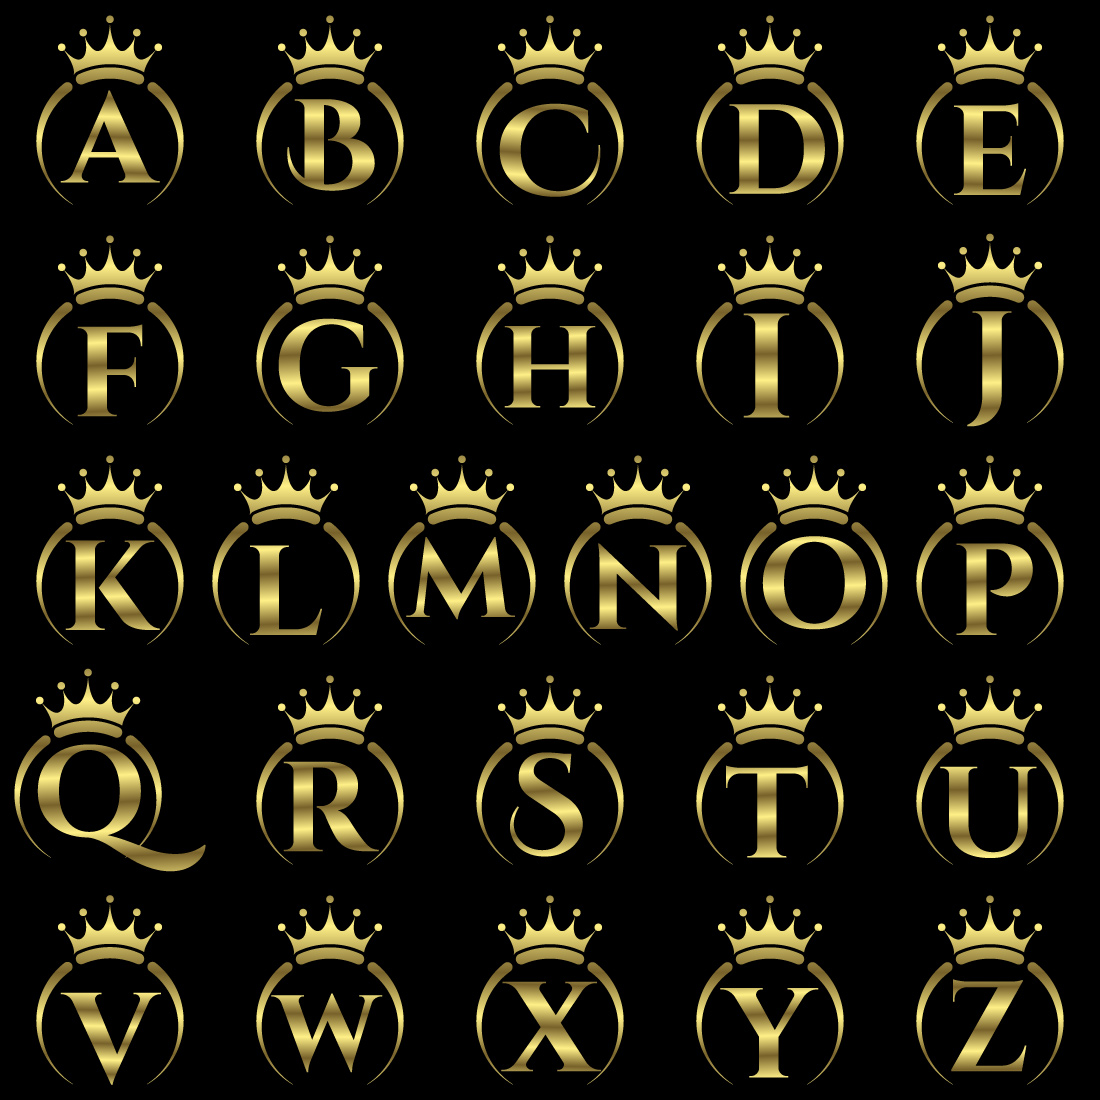 Initial A-Z monogram alphabet with a crown Royal, King, queen luxury symbol Font emblem cover image.